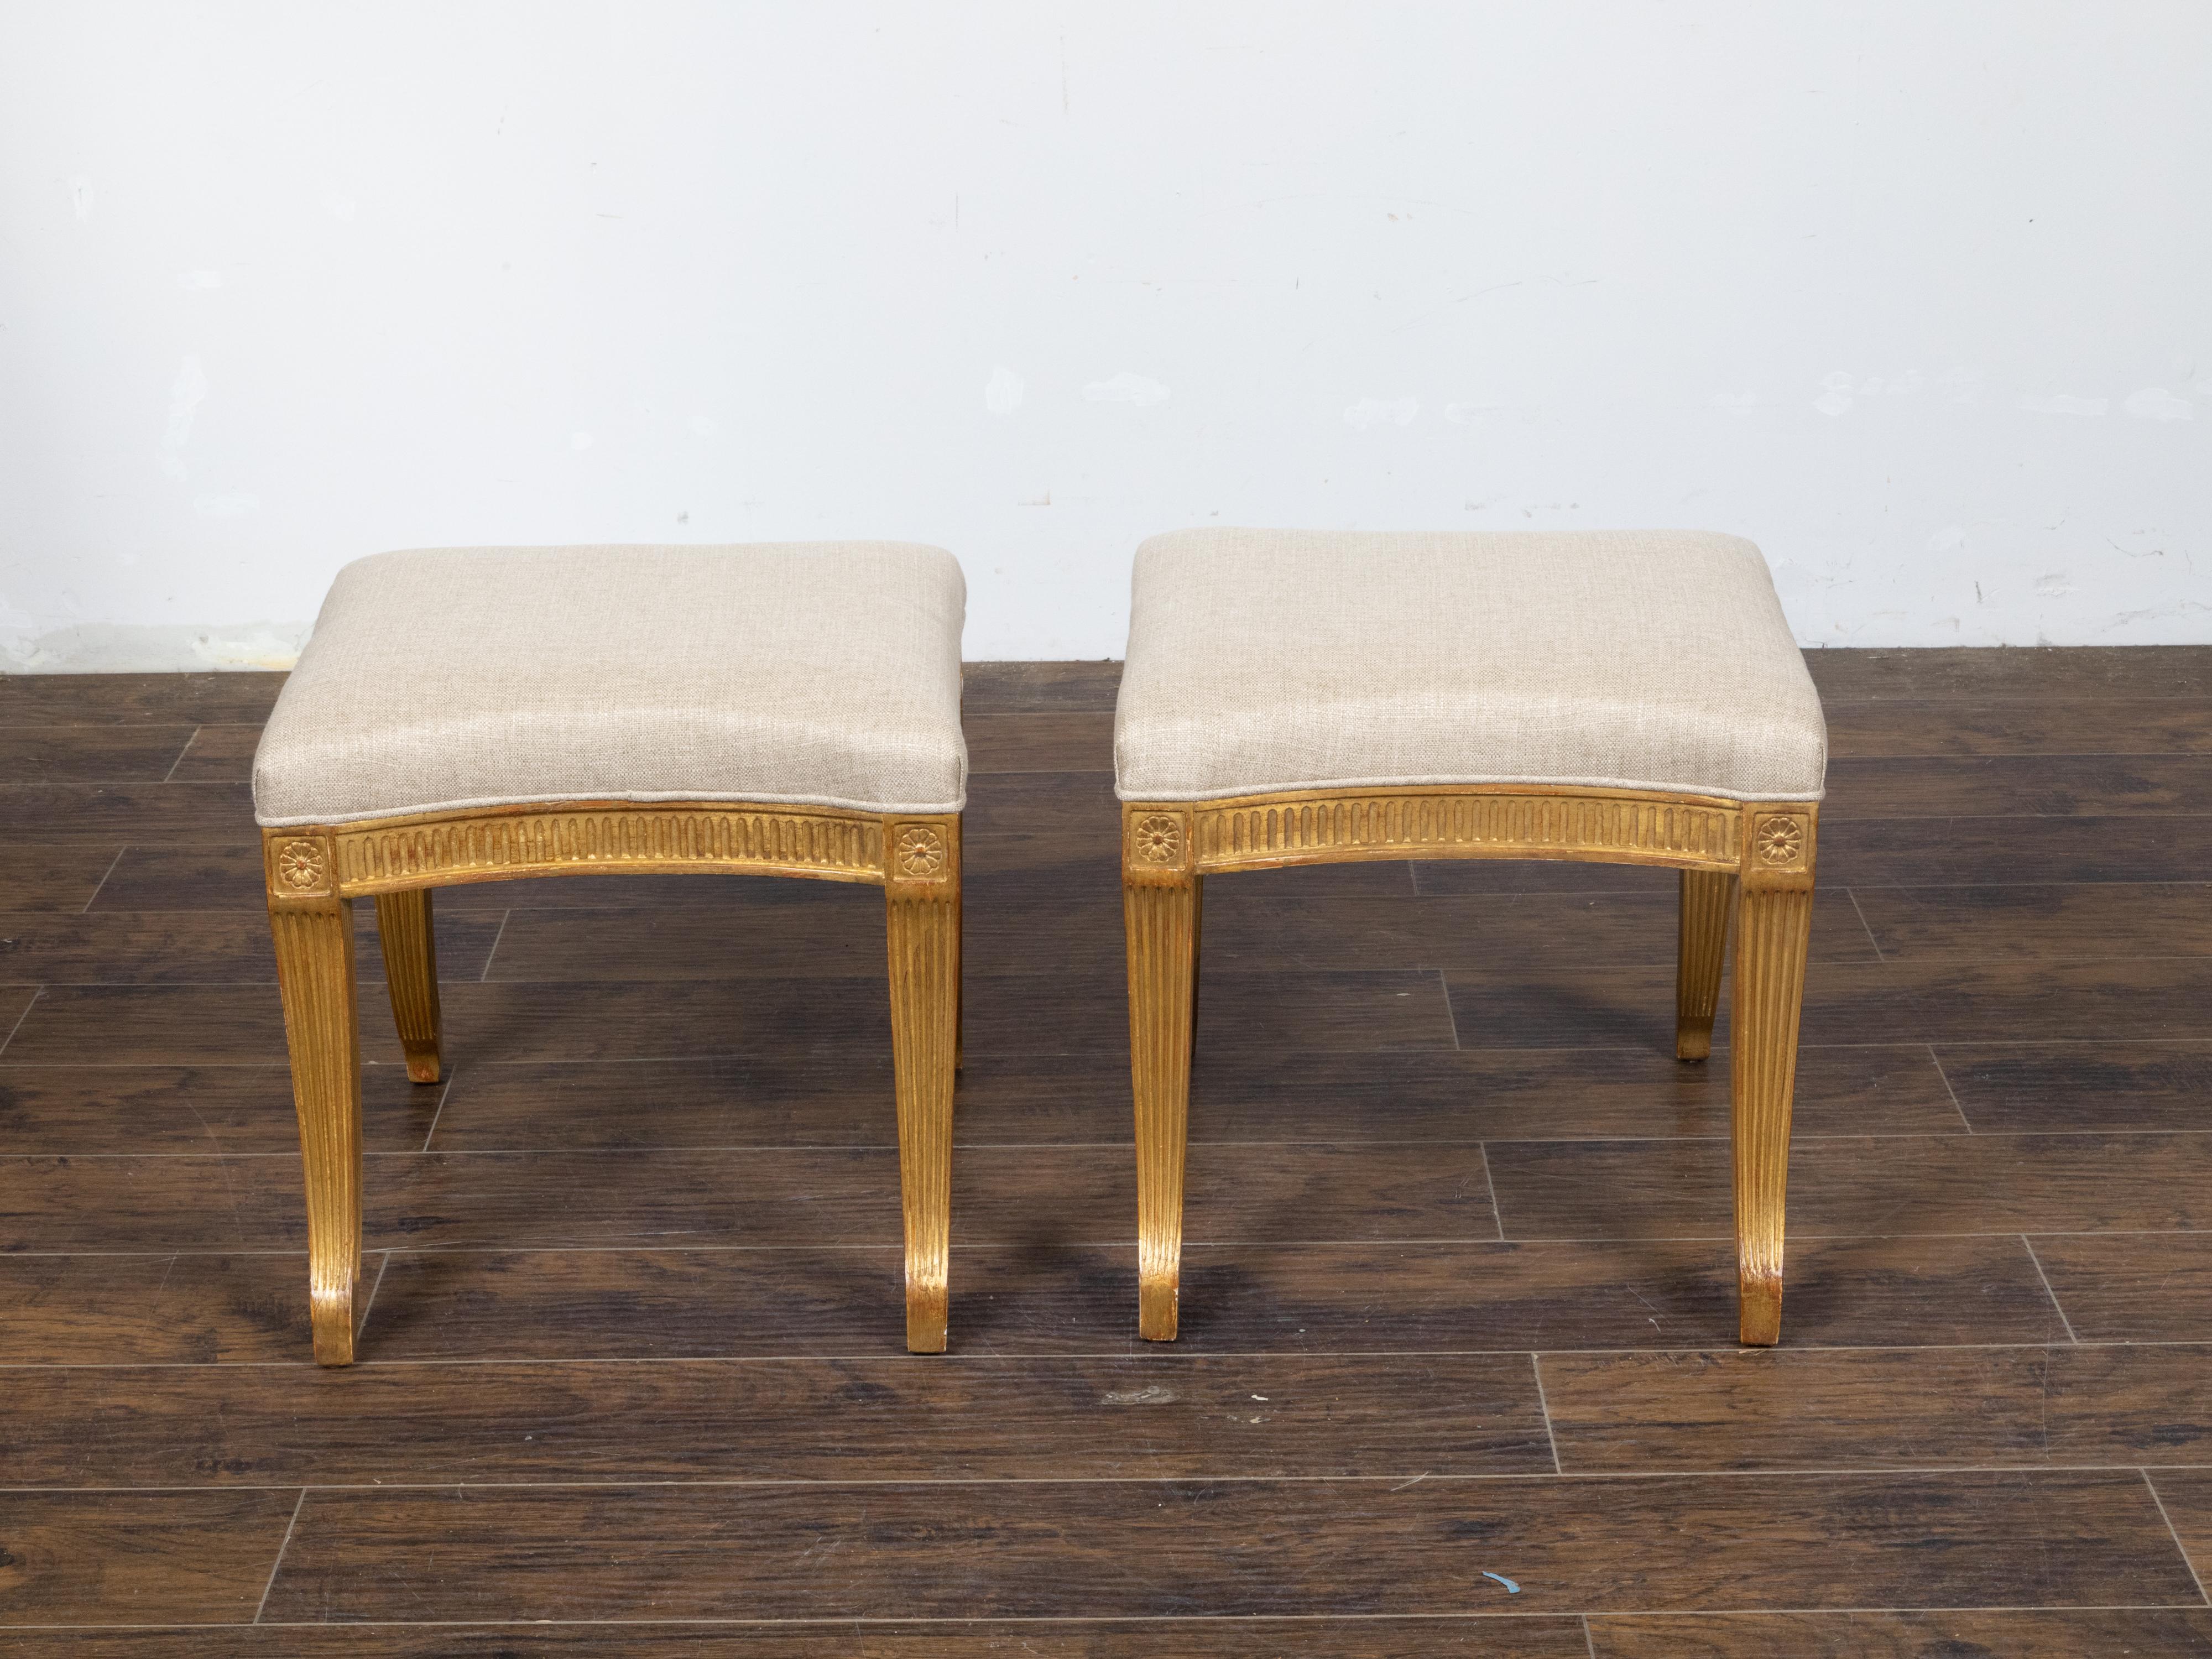 Carved Pair of French Directoire Style Midcentury Giltwood Stools with New Upholstery For Sale